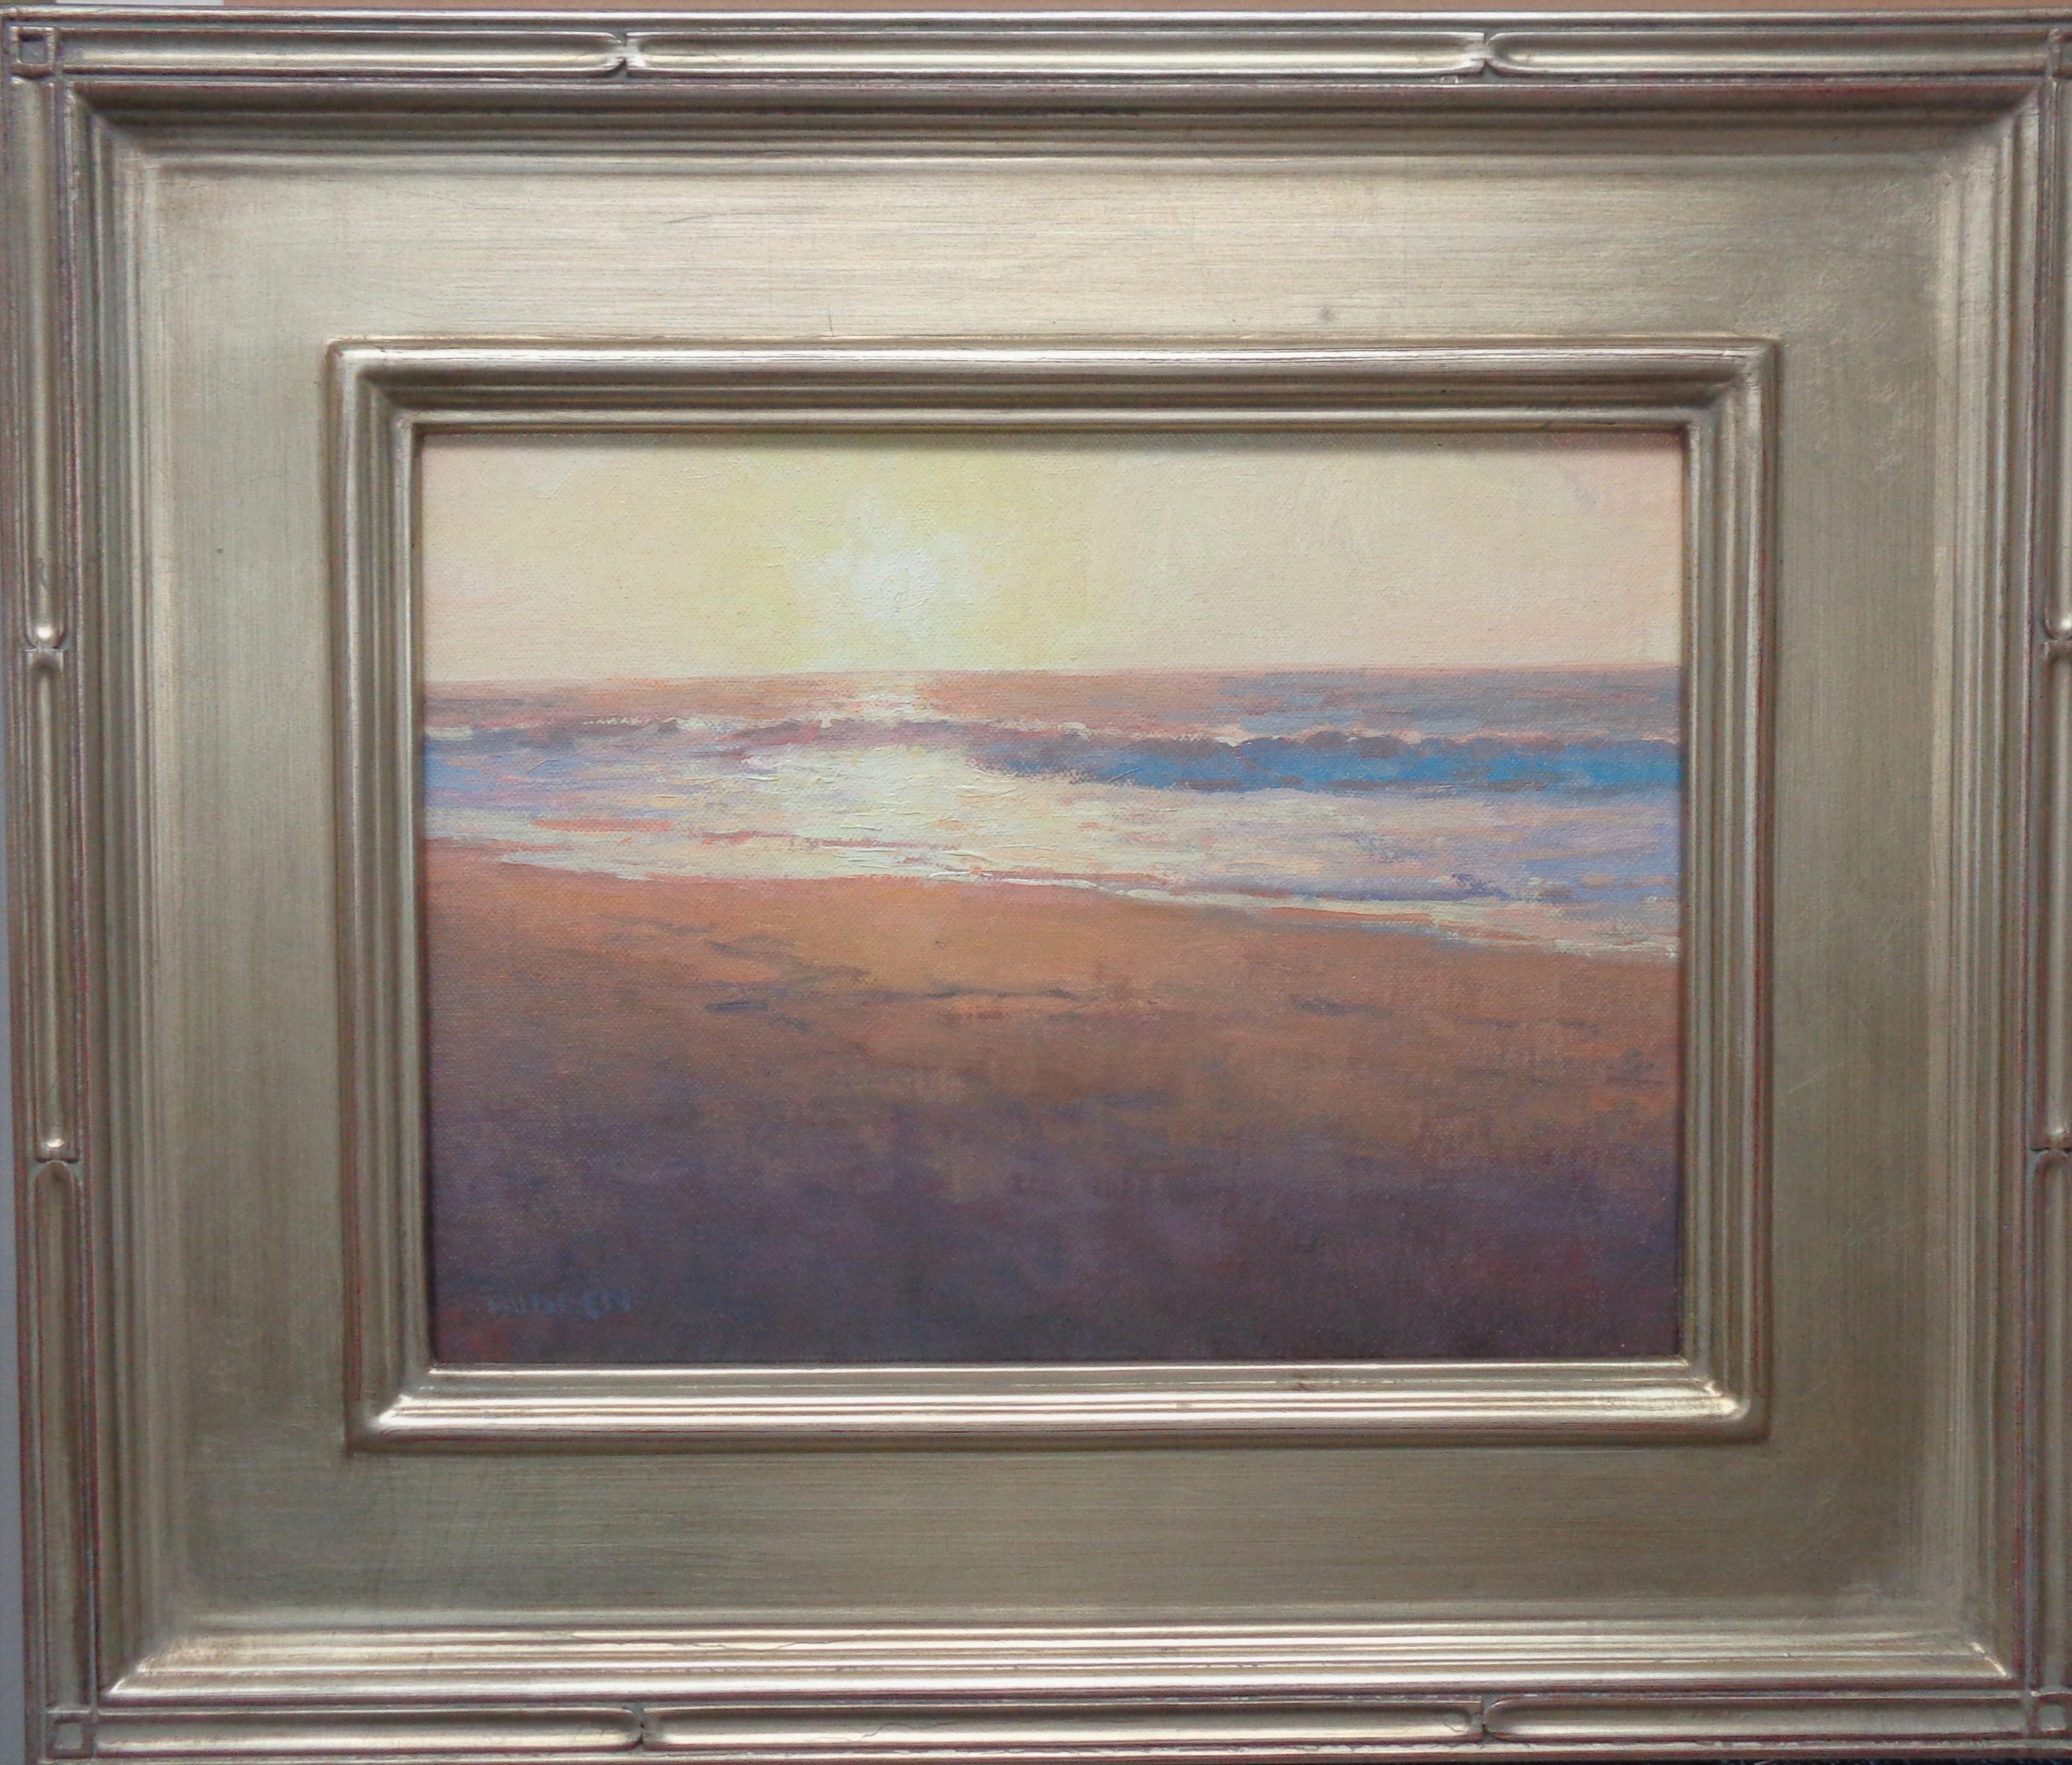 Morning Sun
oil/panel
9 x 12 unframed, 15.5 x 18.5 framed
Morning Sun is a beautiful  oil painting on panel by award winning contemporary artist Michael Budden that showcases the incredible light and color one can witness in the morning sunrise at